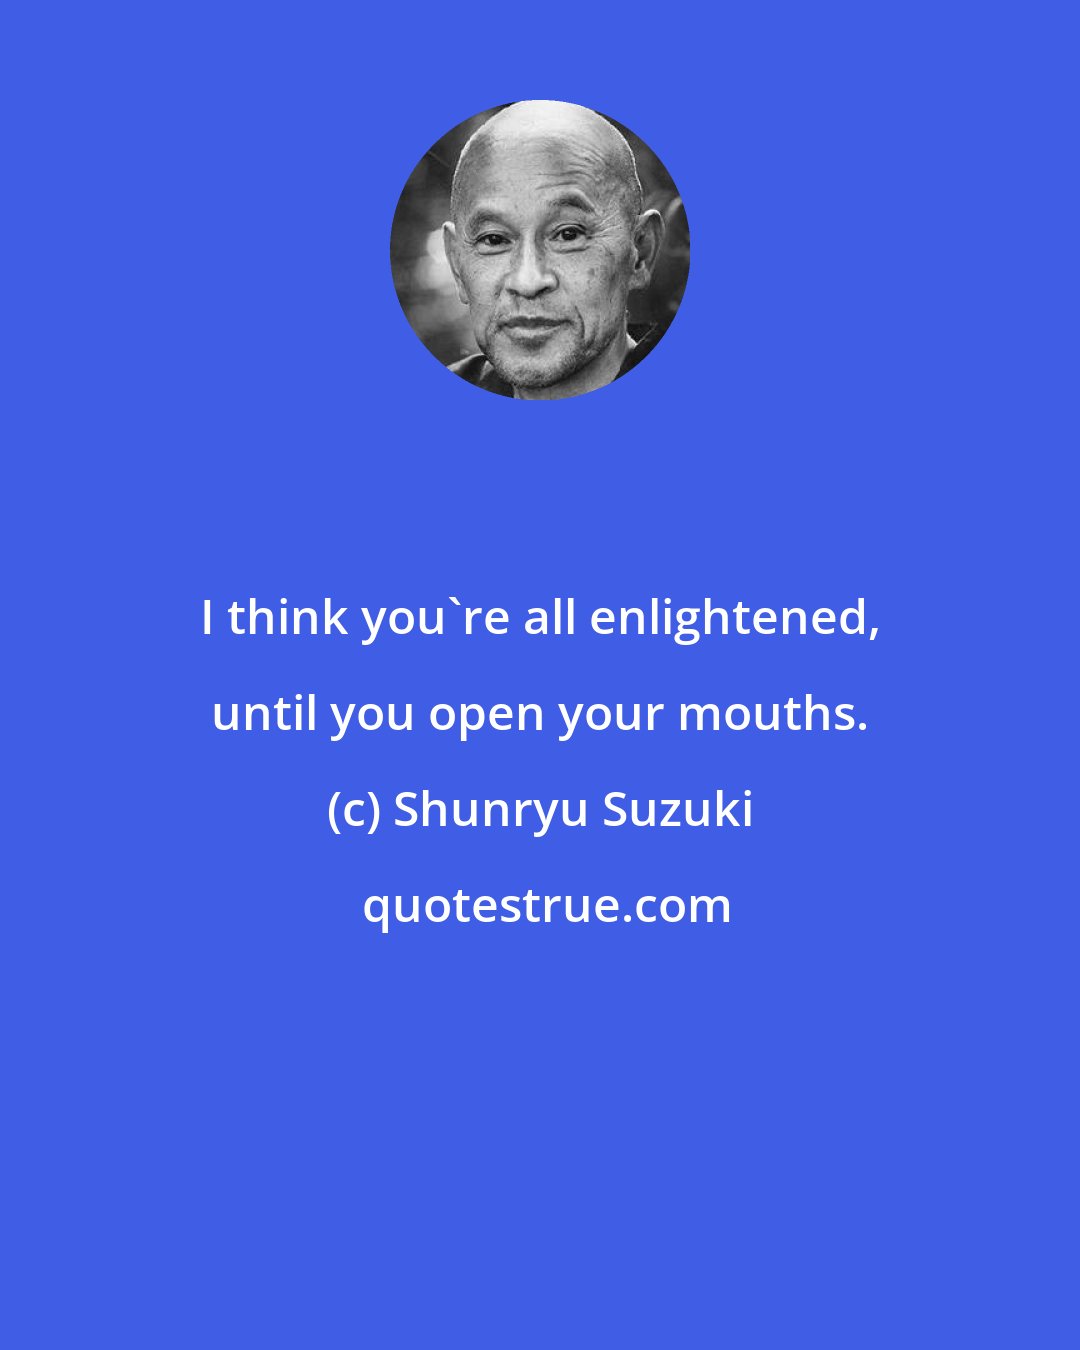 Shunryu Suzuki: I think you're all enlightened, until you open your mouths.